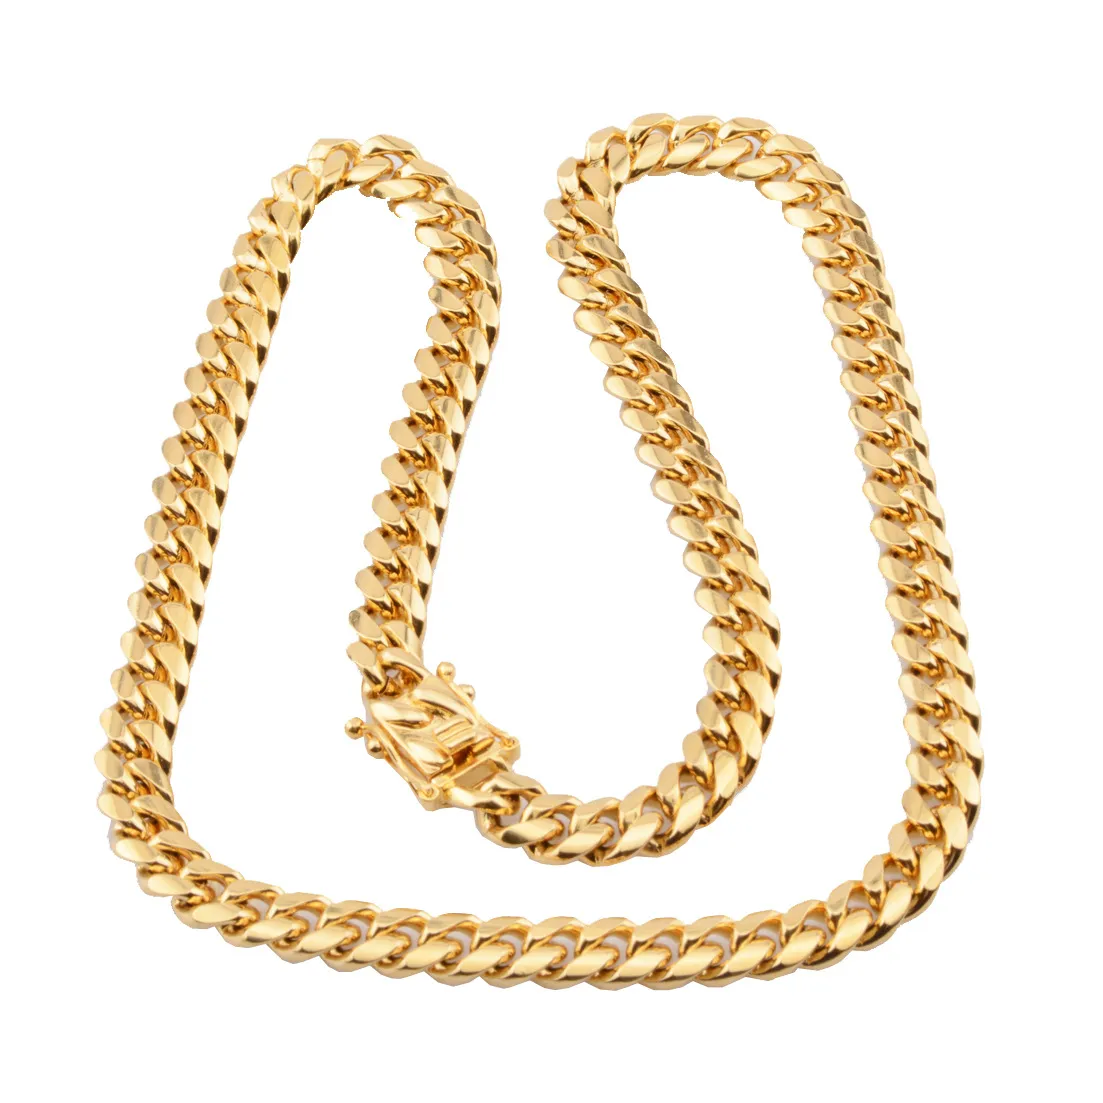 8mm 10mm 12mm 14mm 16mm Miami Cuban Link Chains Stainless Steel Mens 14K Gold Chains High Polished Punk Curb Necklaces274P